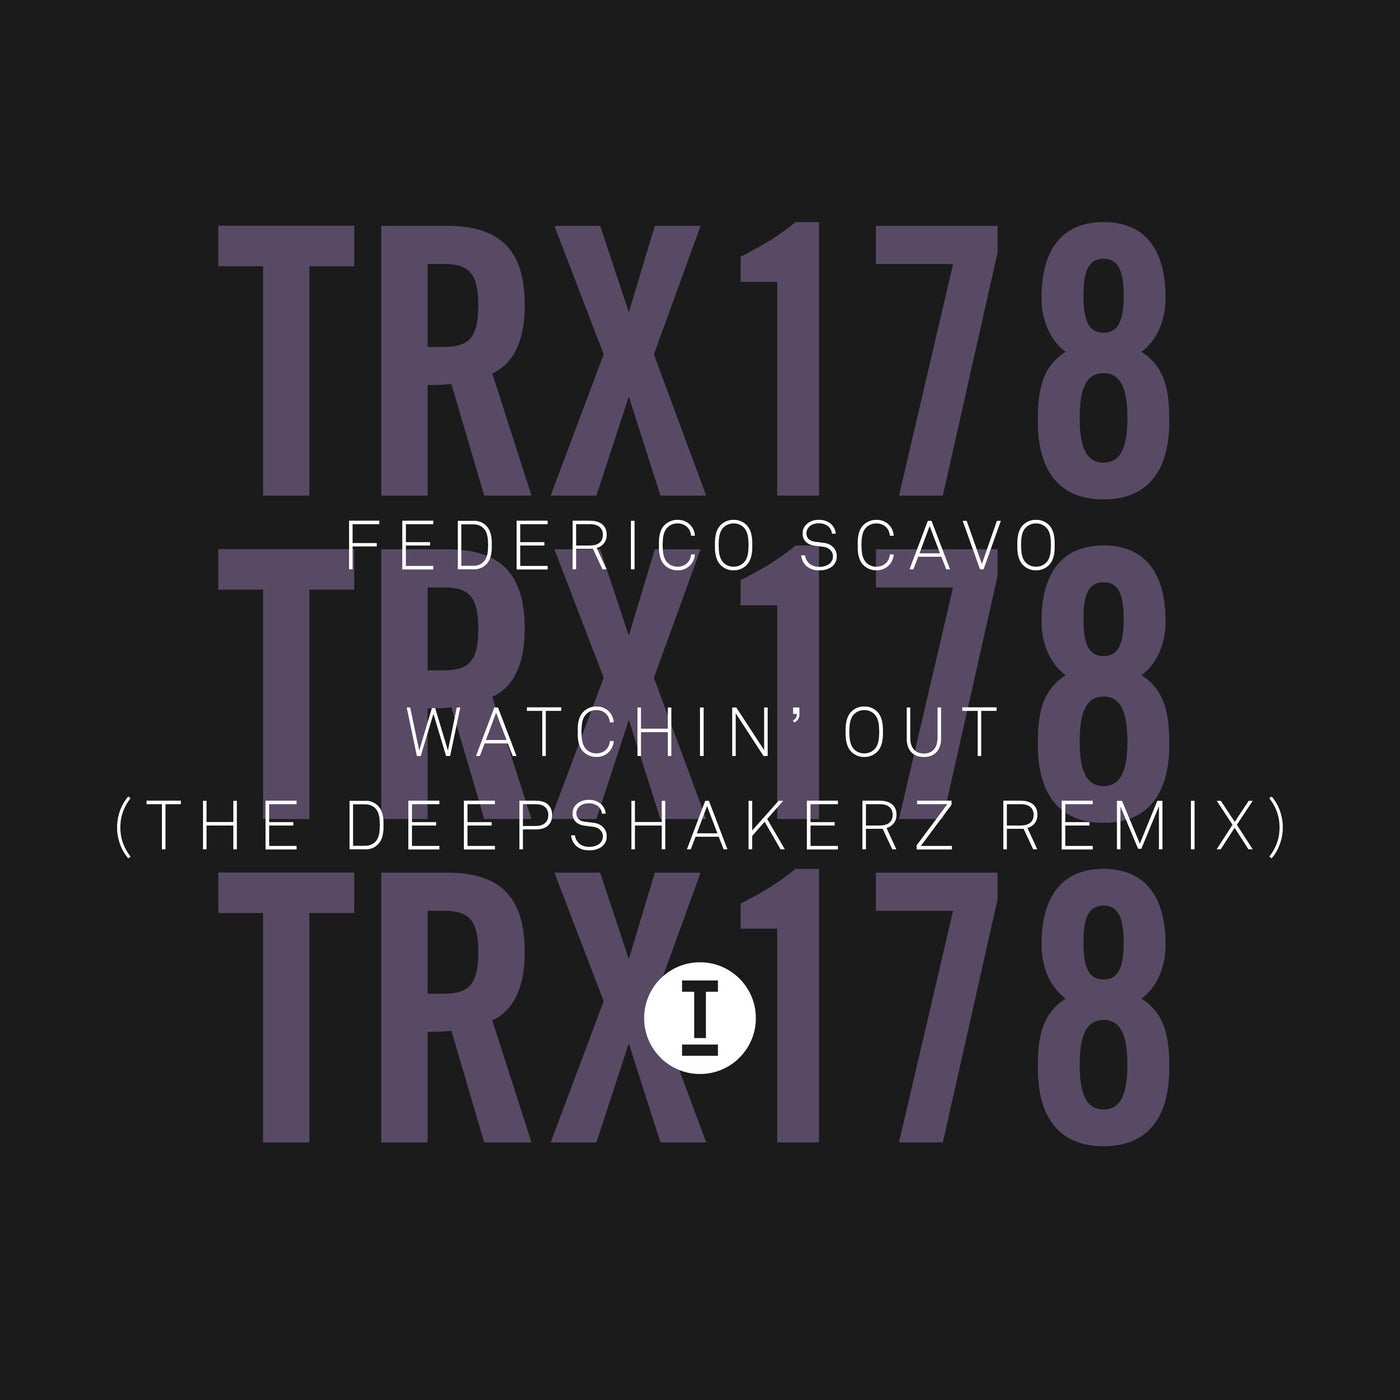 Federico Scavo - Watchin’ Out (The Deepshakerz Extended Mix)